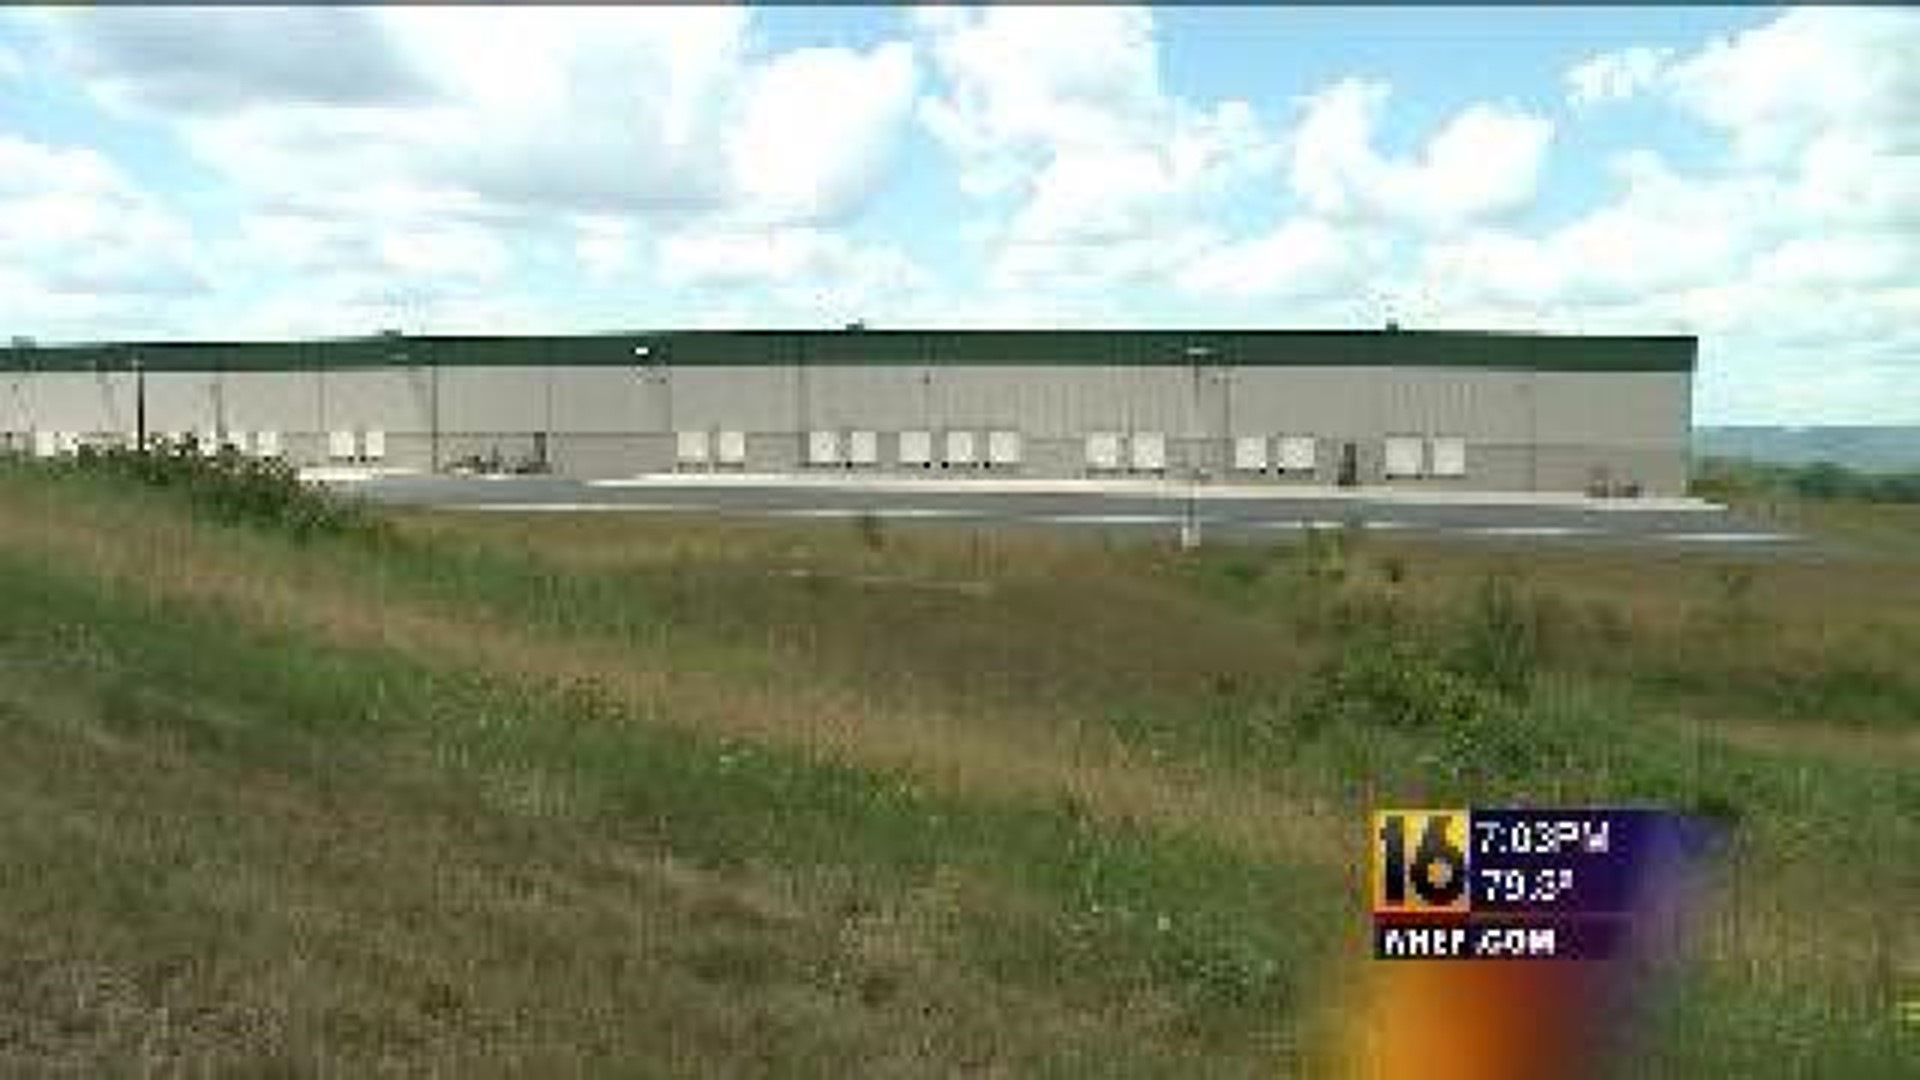 Neiman Marcus Moving into Luzerne County